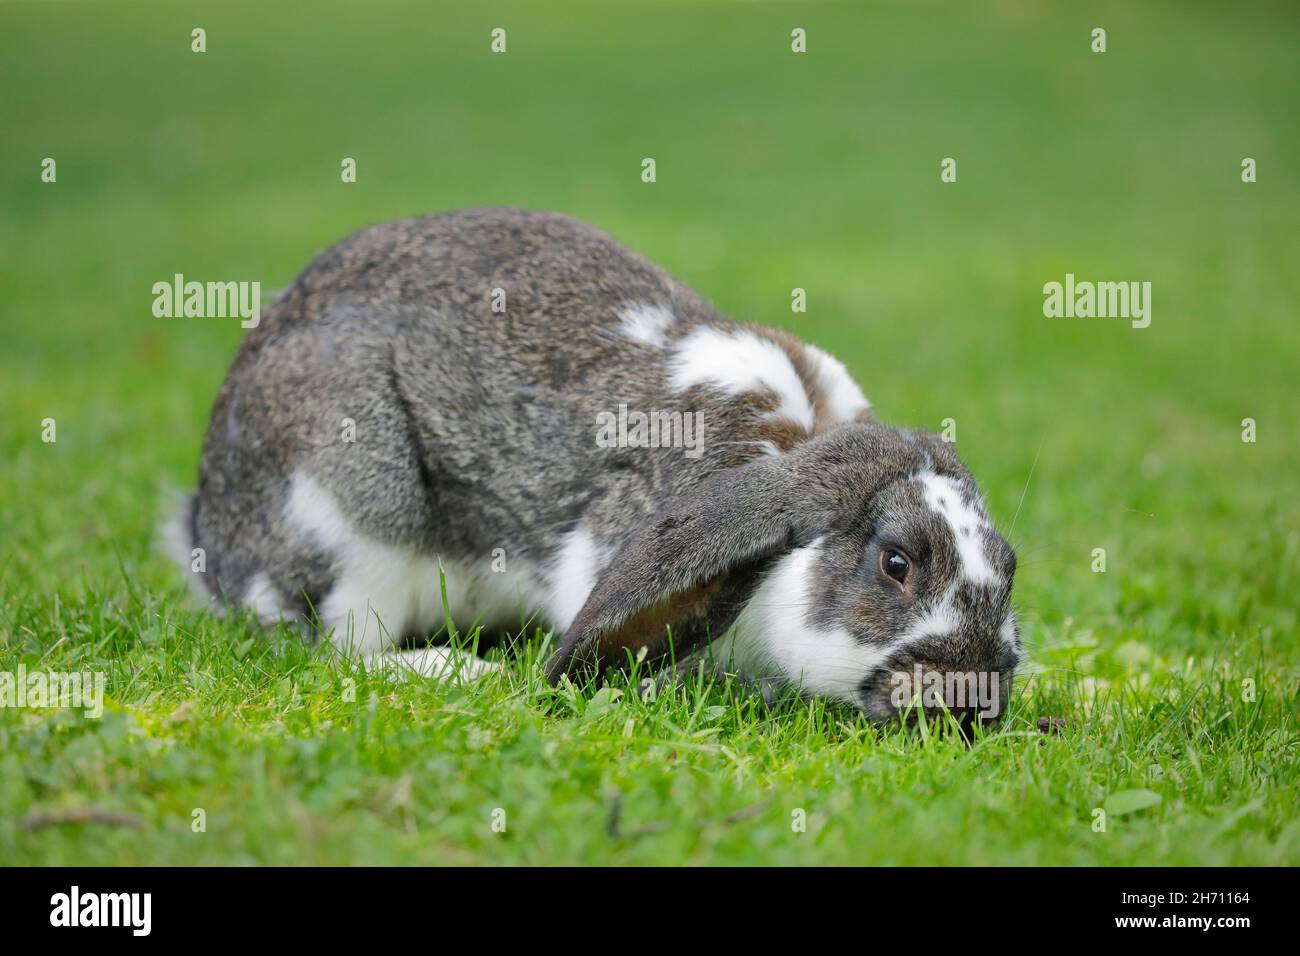 Domestic rabbit. Gray and white piebald loop-eared rabbit eats grass in a meadow, Switzerland Stock Photo